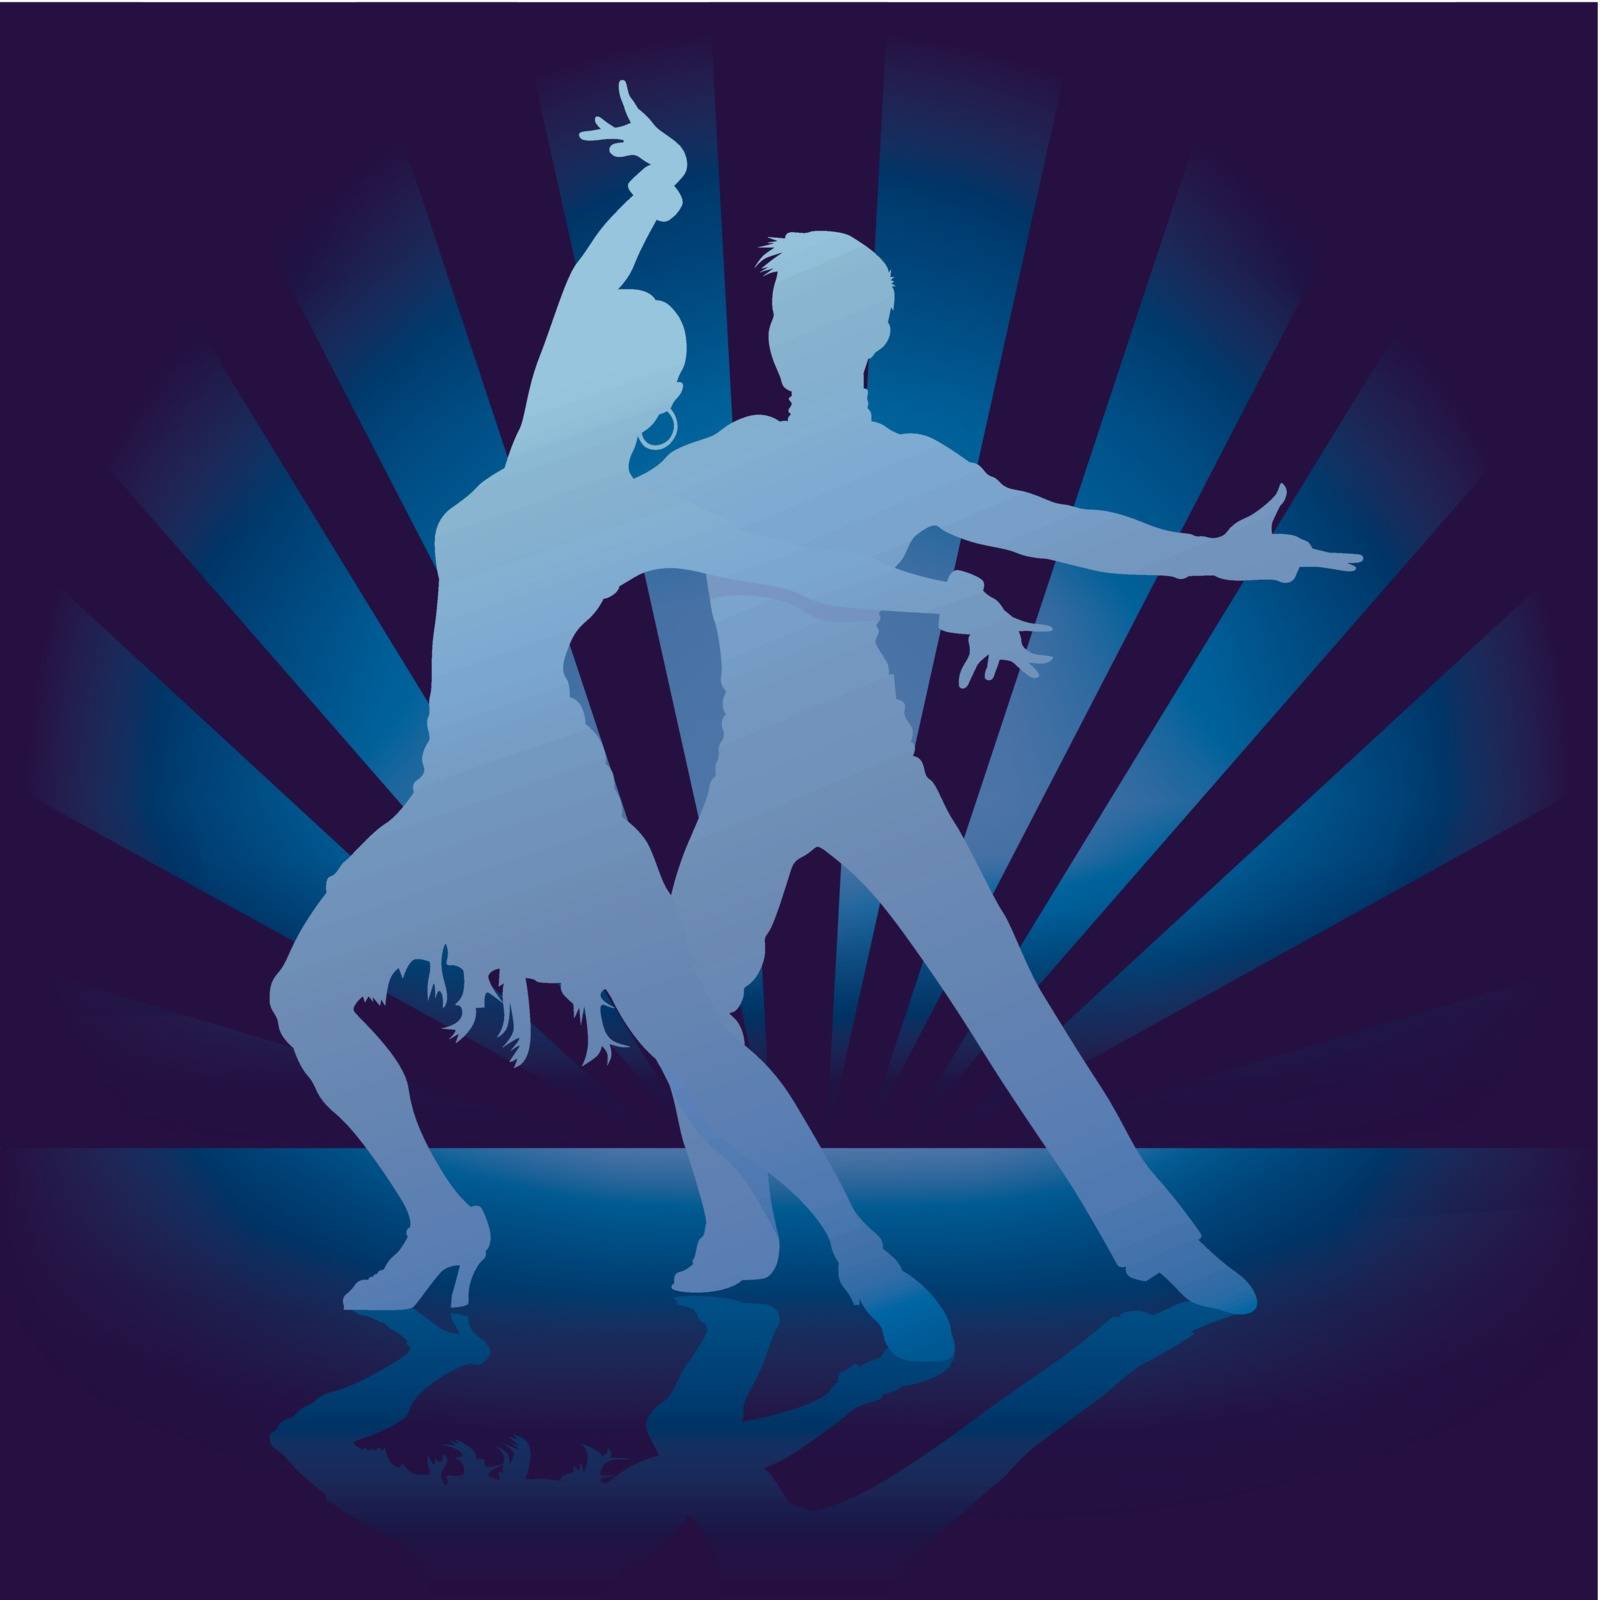 Dance Rumba - Dancing Silhouettes As Background Illustration, Vector